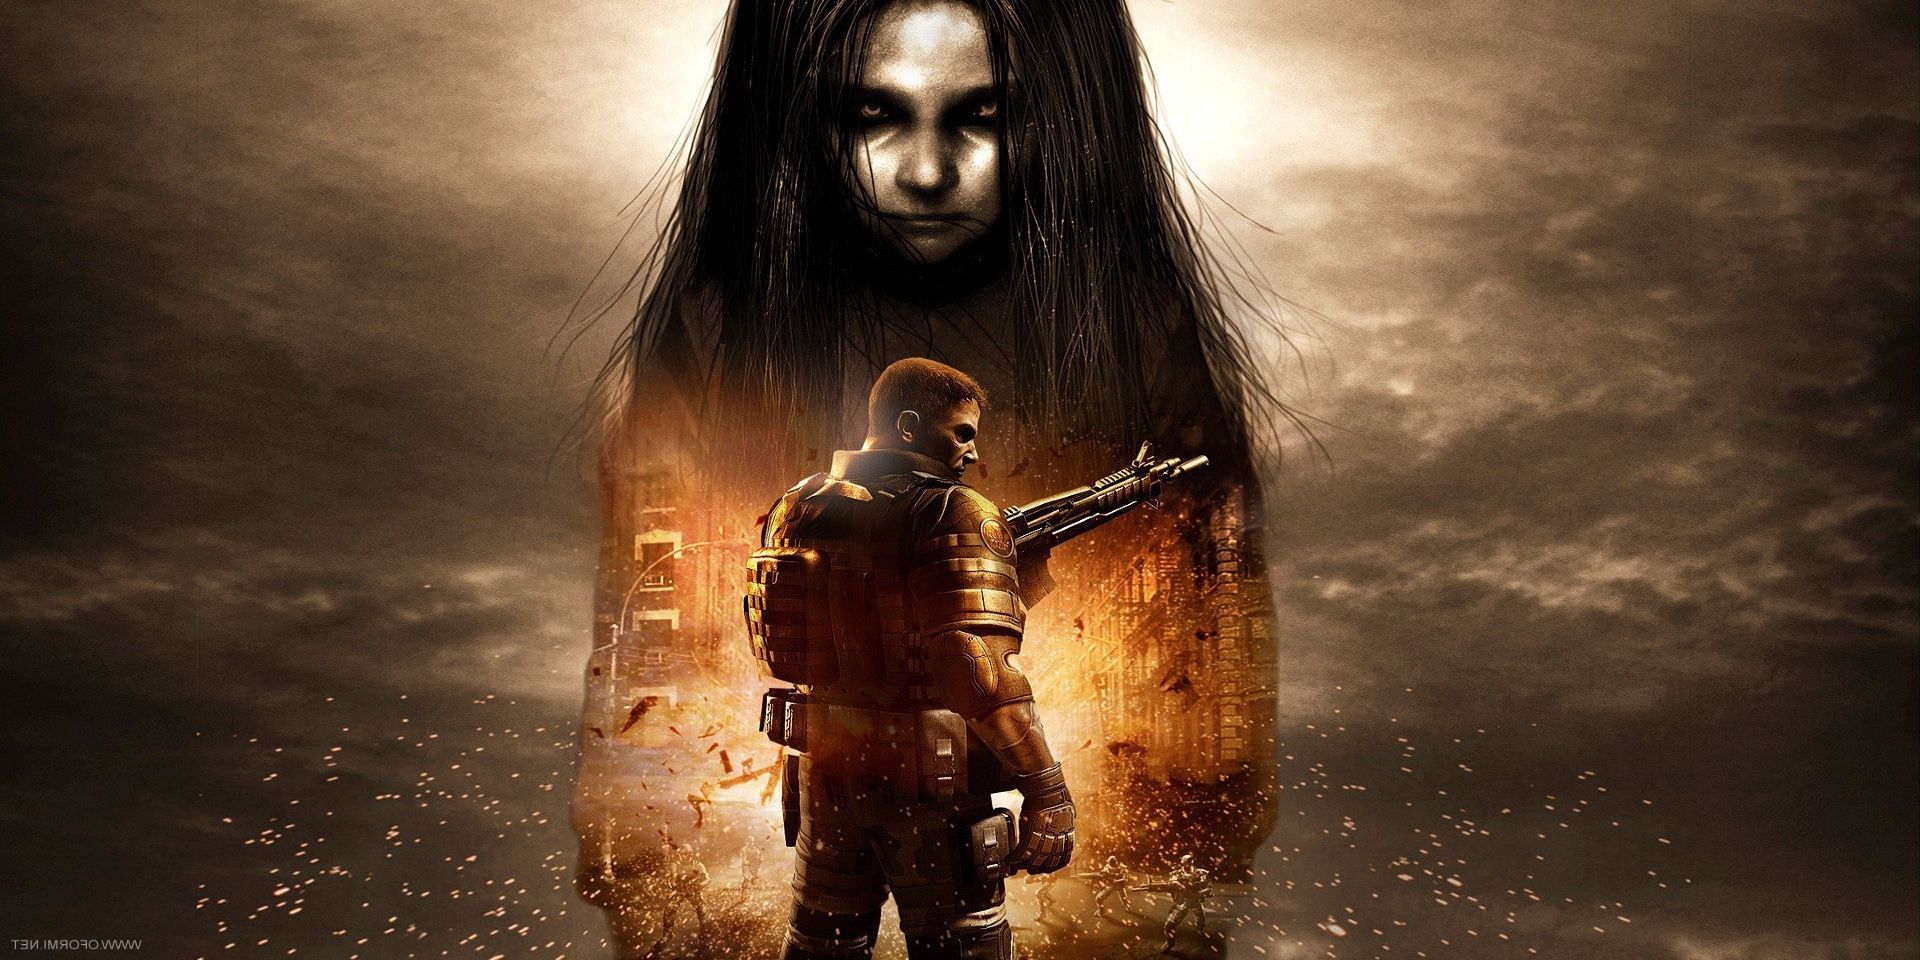 A promotional image for the second game in the F.E.A.R. video game series.